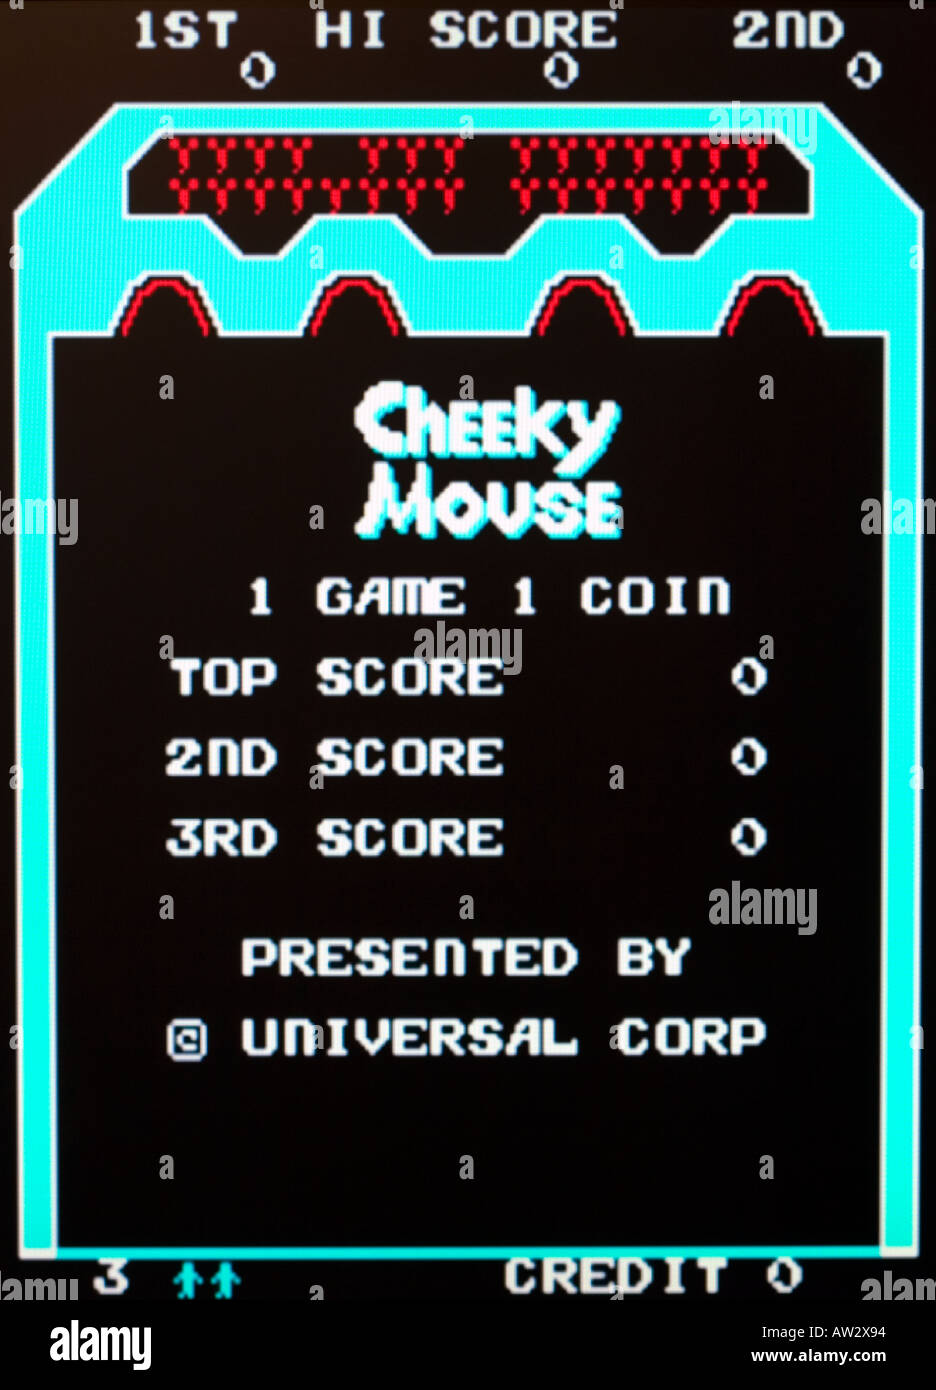 Cheeky Mouse Universal Corp Vintage arcade videogame screen shot - EDITORIAL USE ONLY Stock Photo